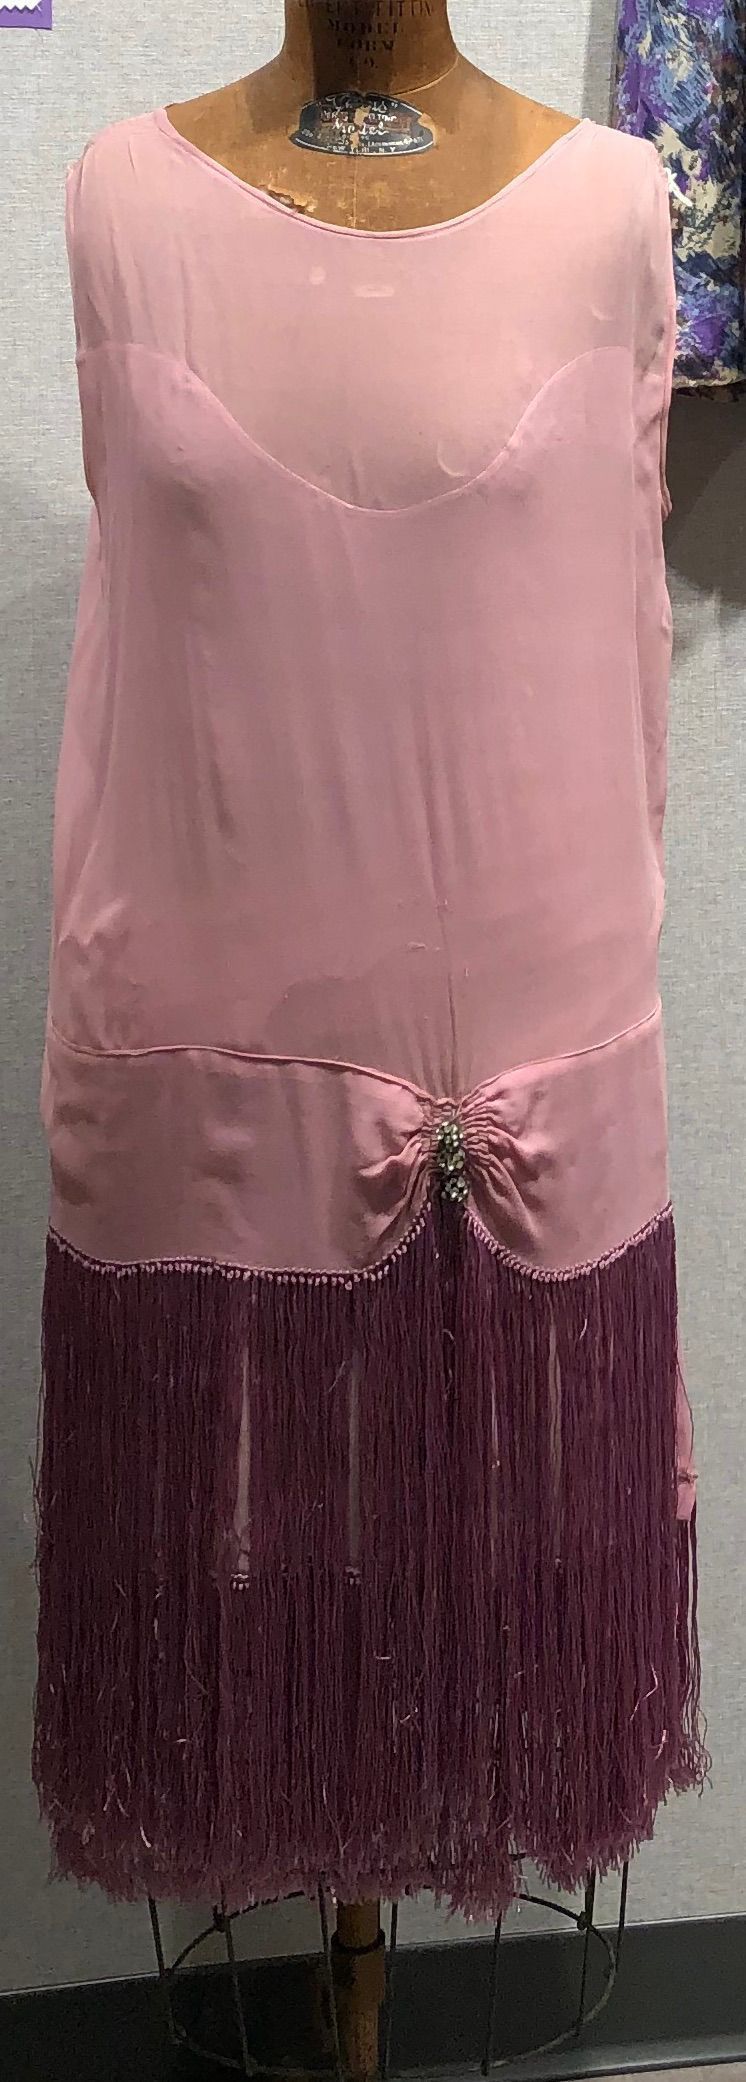          Dress: Pink Fringed Dress, 1920s picture number 1
   